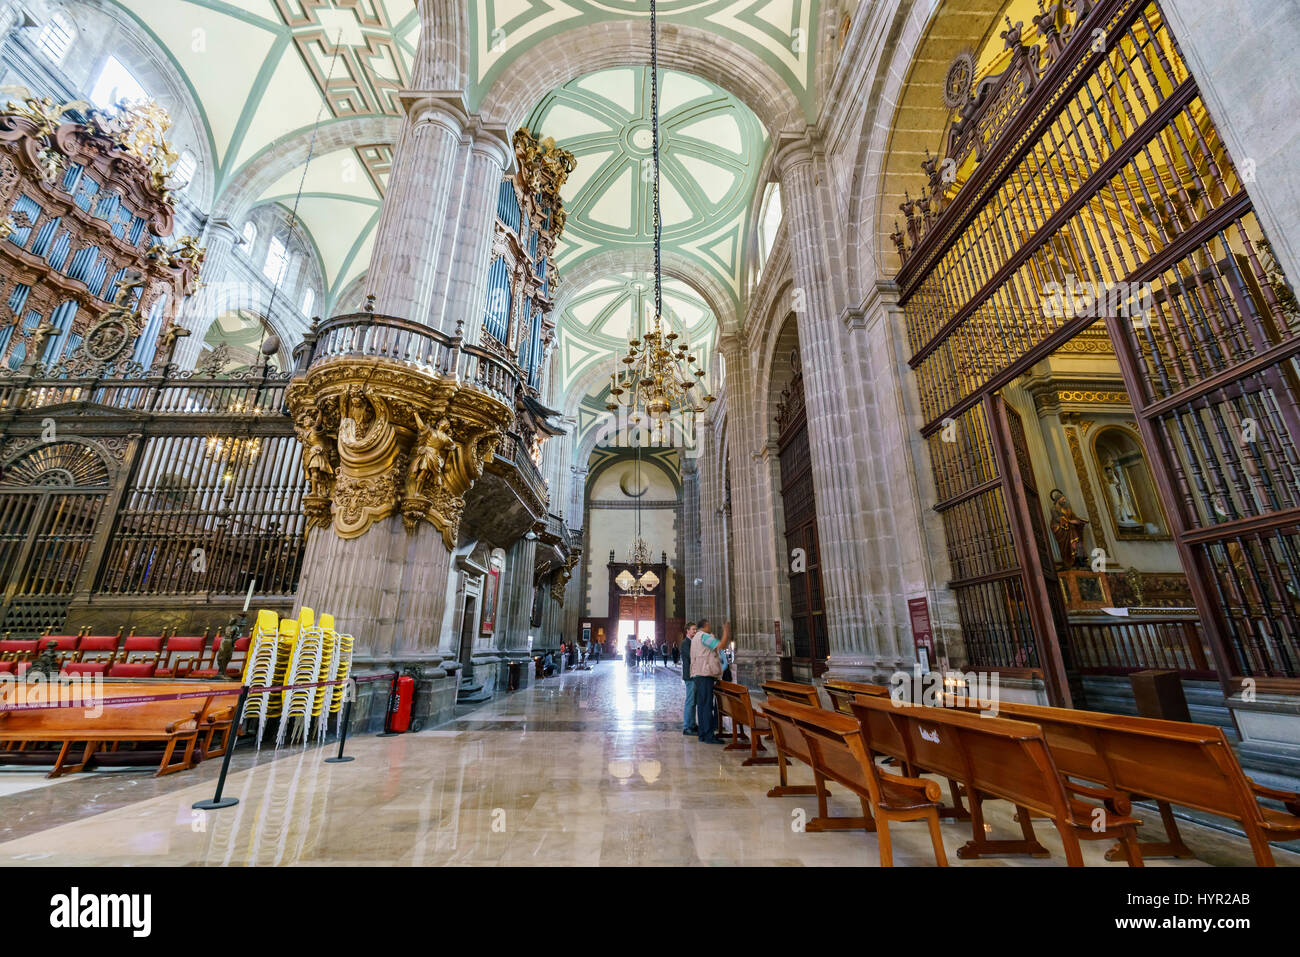 Mexico City, FEB 17: Interior view of the historical Mexico City Metropolitan Cathedral on FEB 17, 2017 at Mexico City Stock Photo